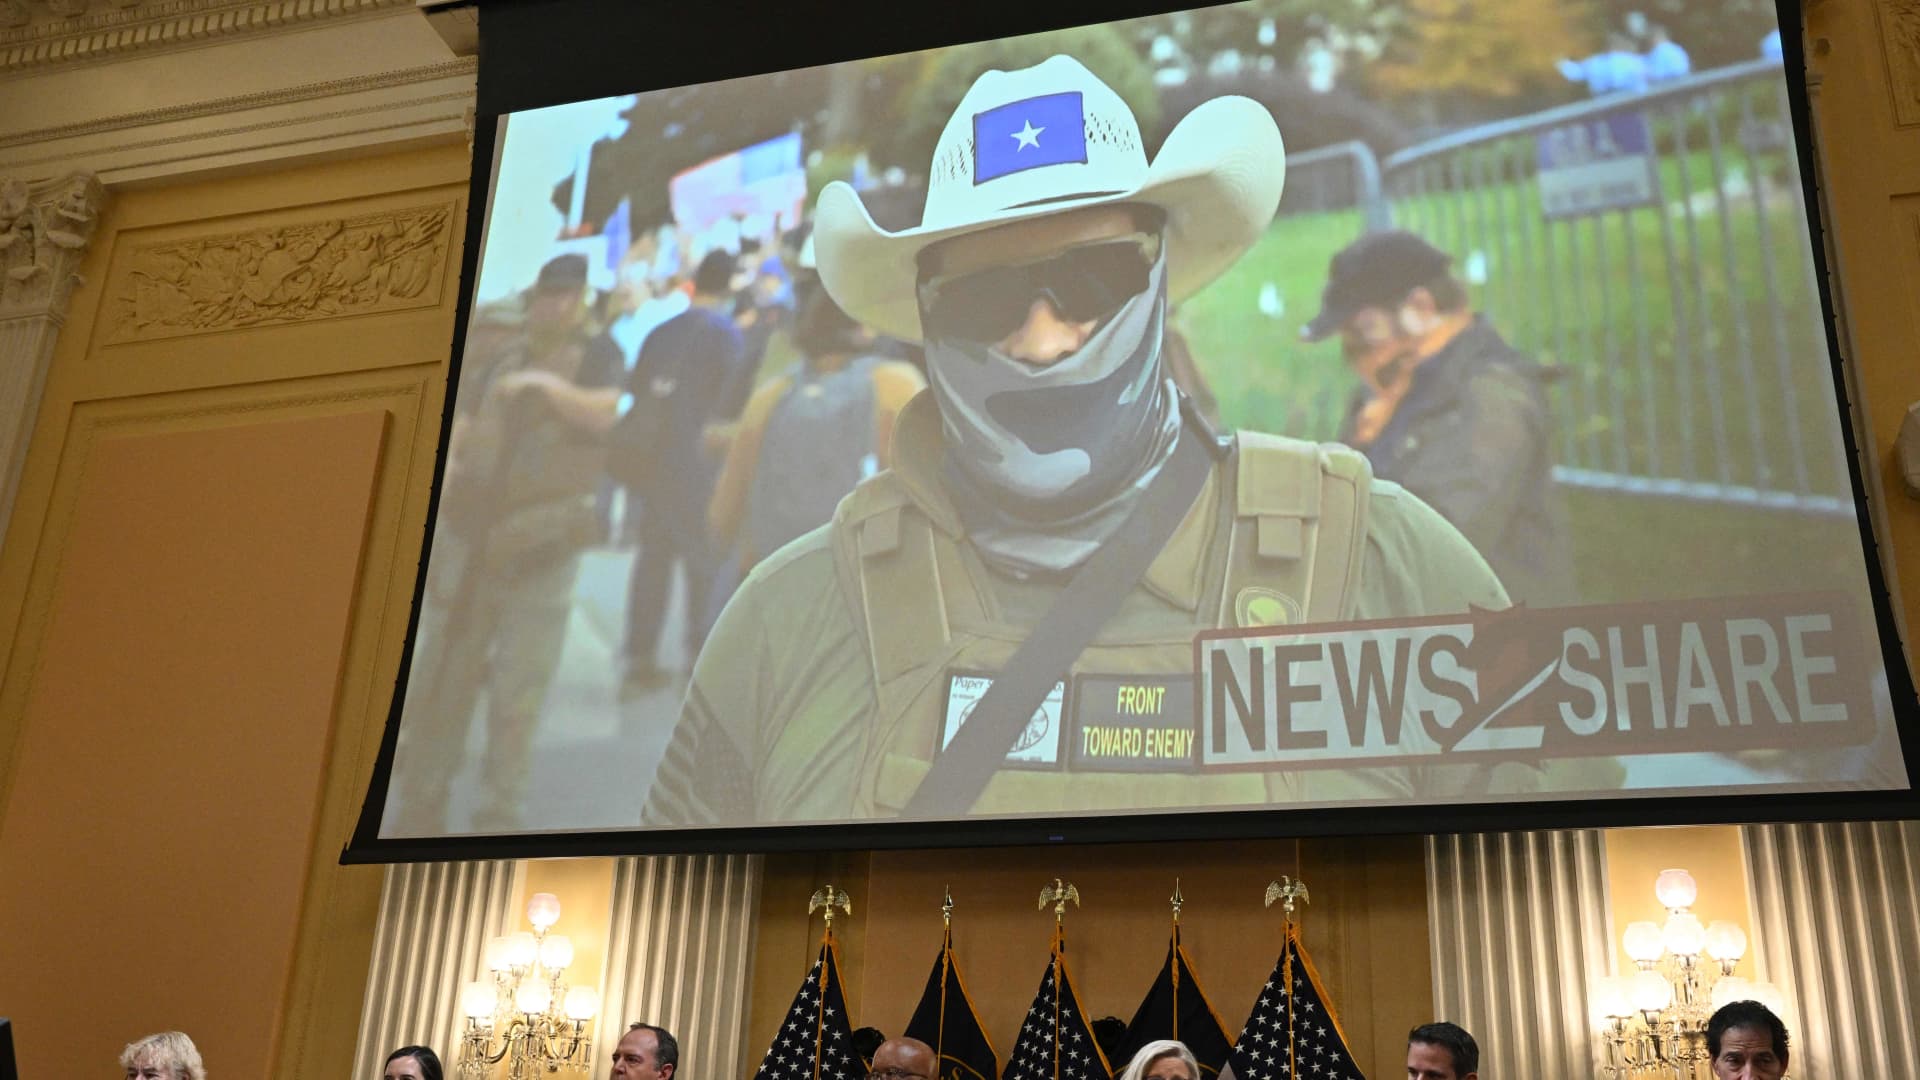 An image of a rioter is displayed on a screen during the fourth hearing by the House Select Committee to Investigate the January 6th Attack on the US Capitol in the Cannon House Office Building on June 21, 2022 in Washington, DC.